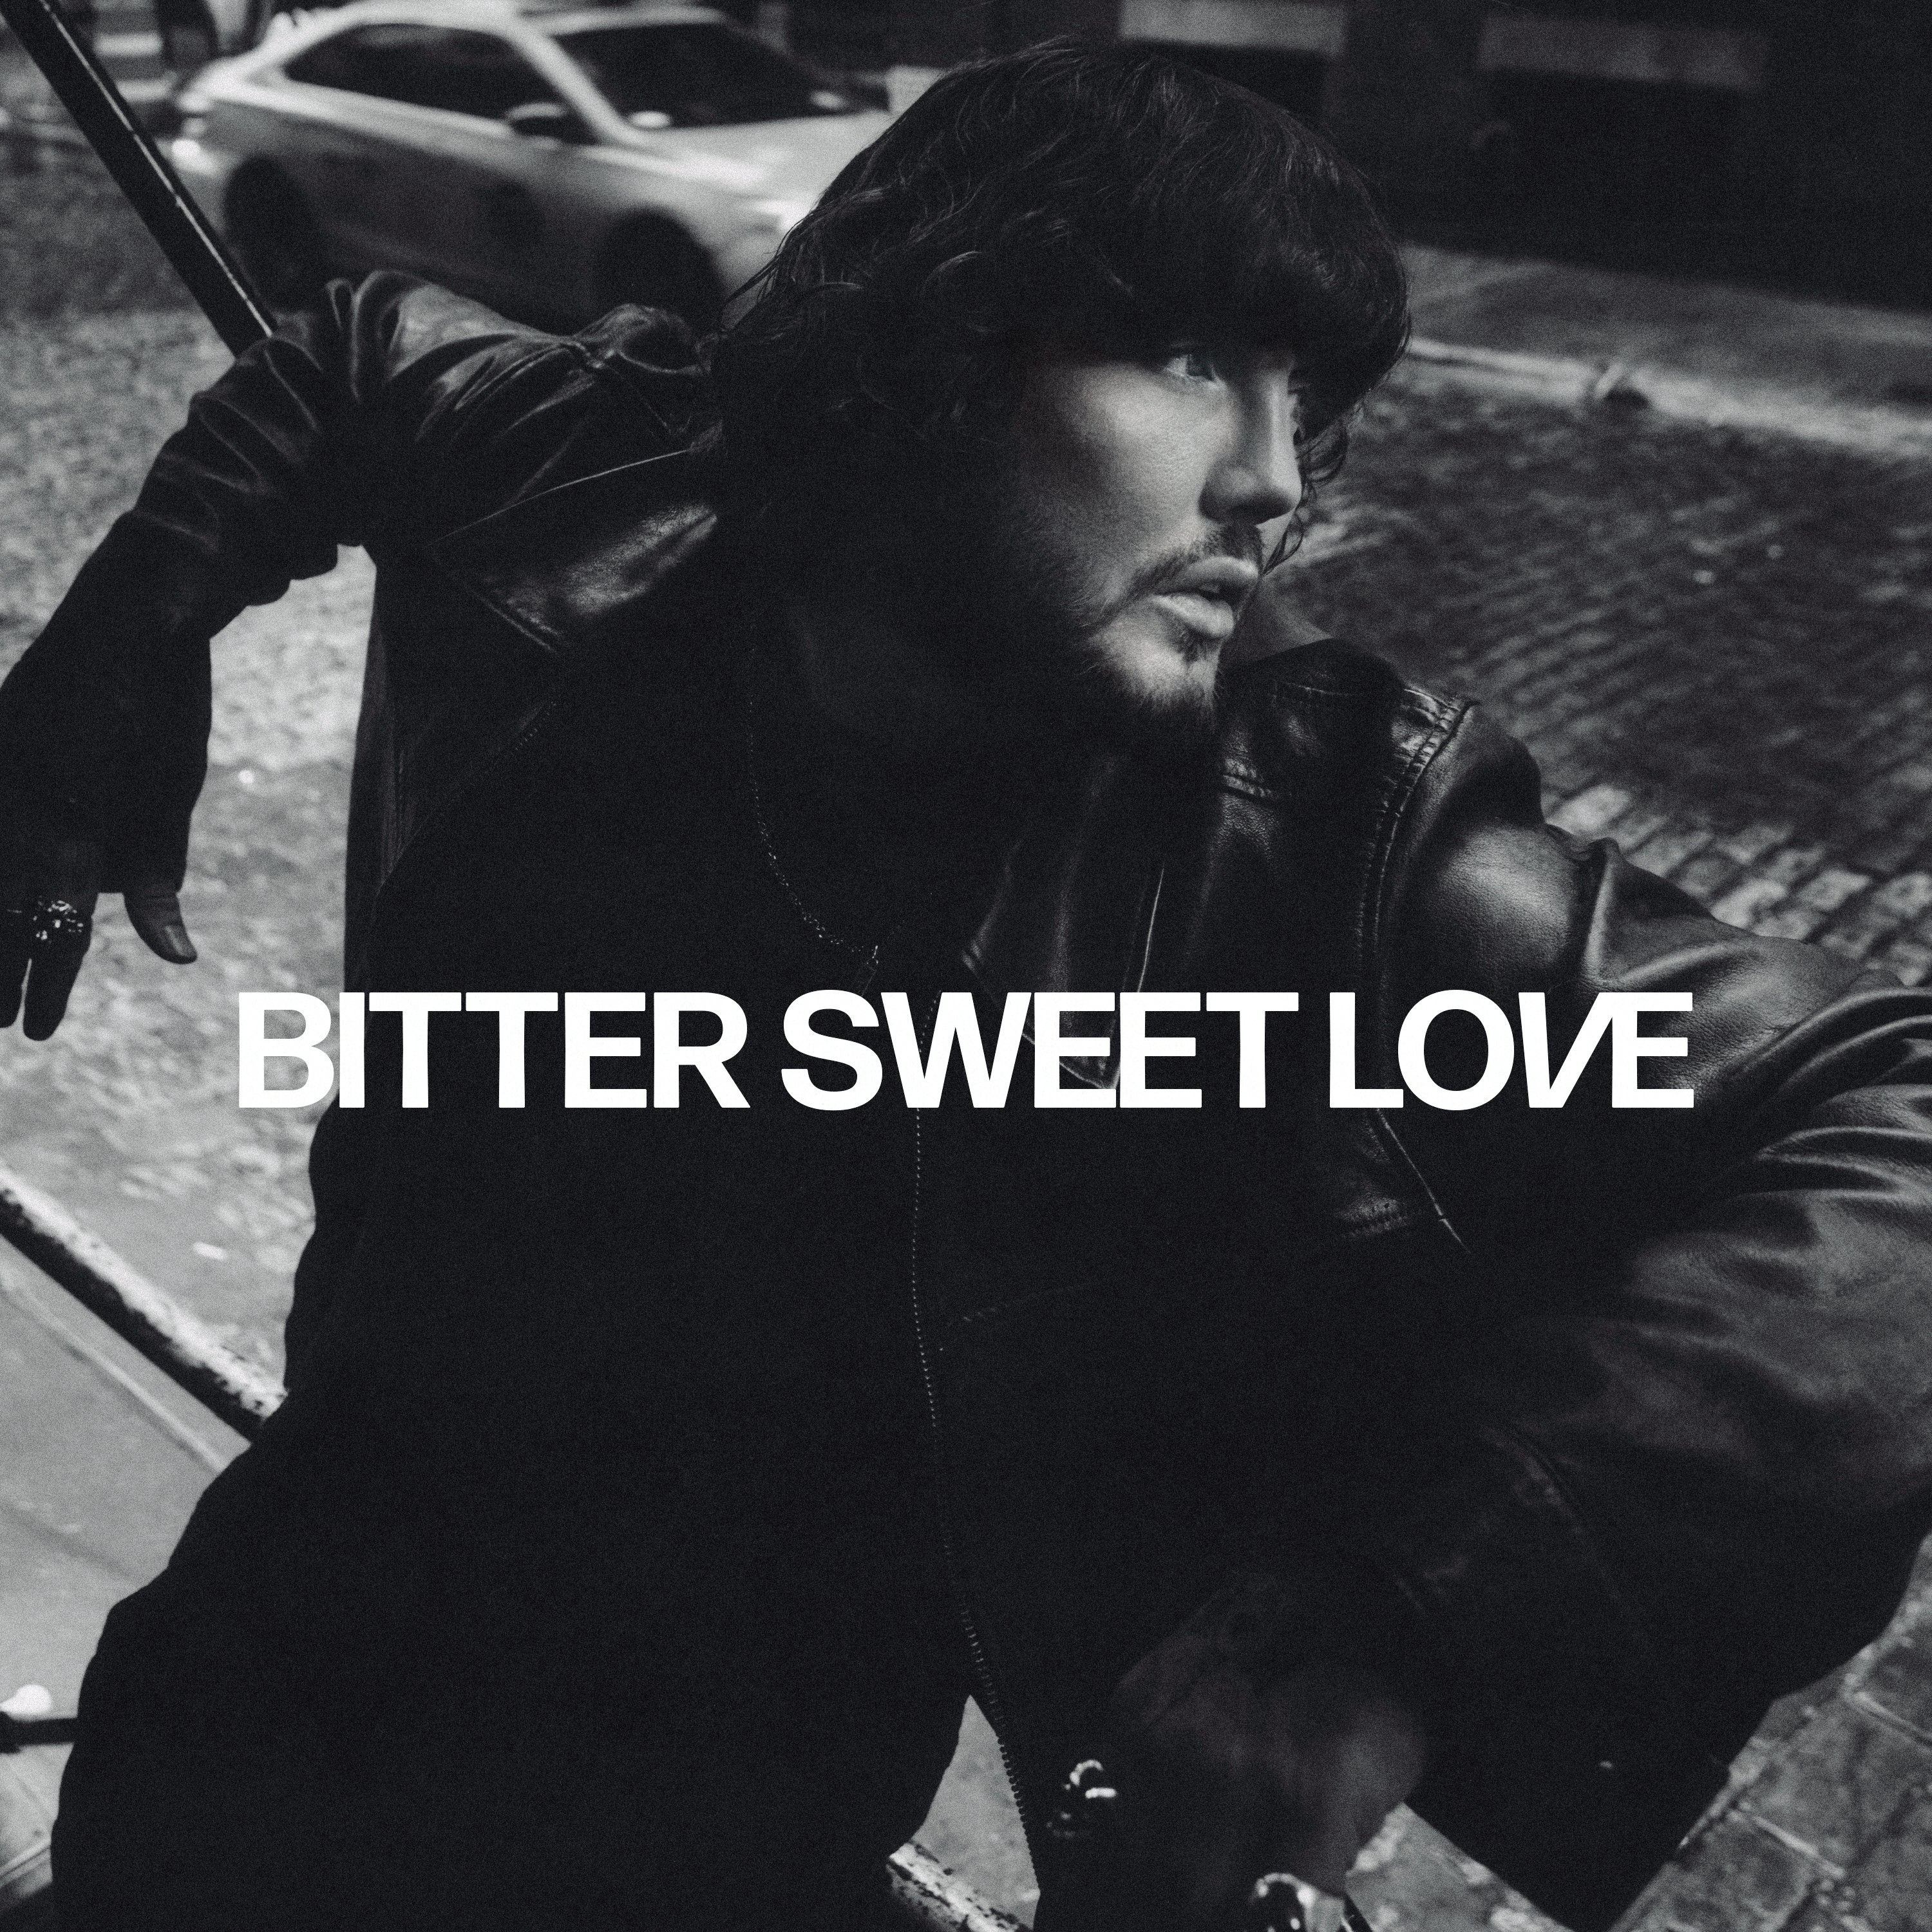 BITTER SWEET LOVE - THE NEW ALBUM OUT NOW